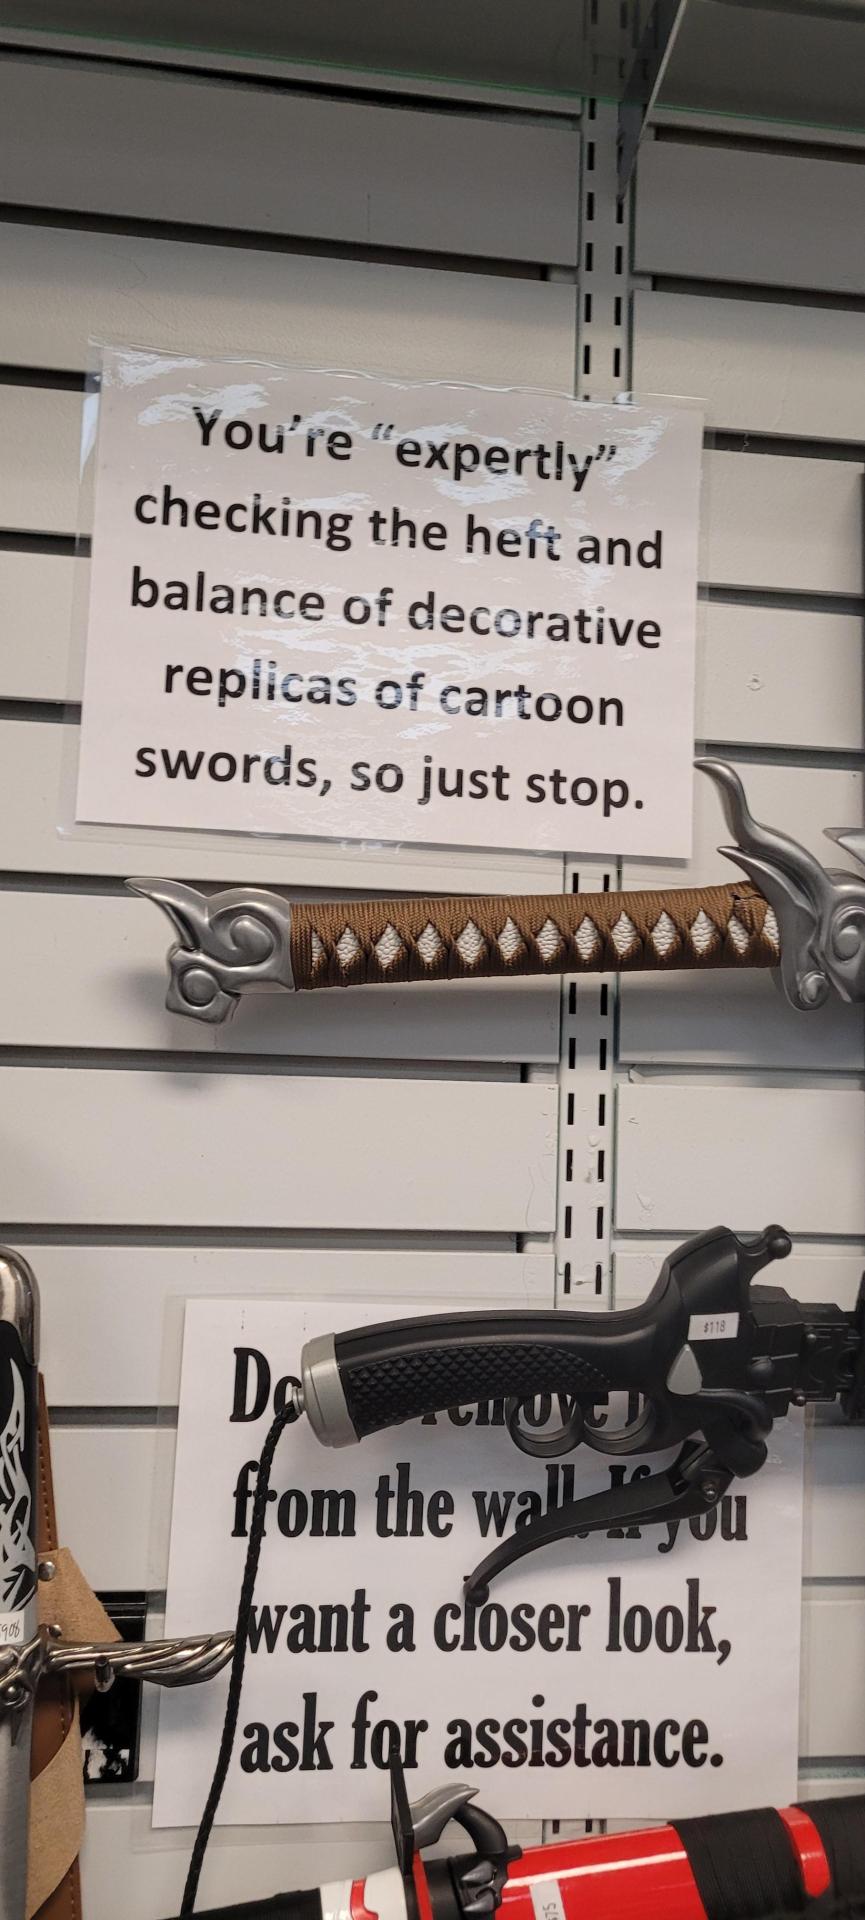 Found at my local “mall sword store”